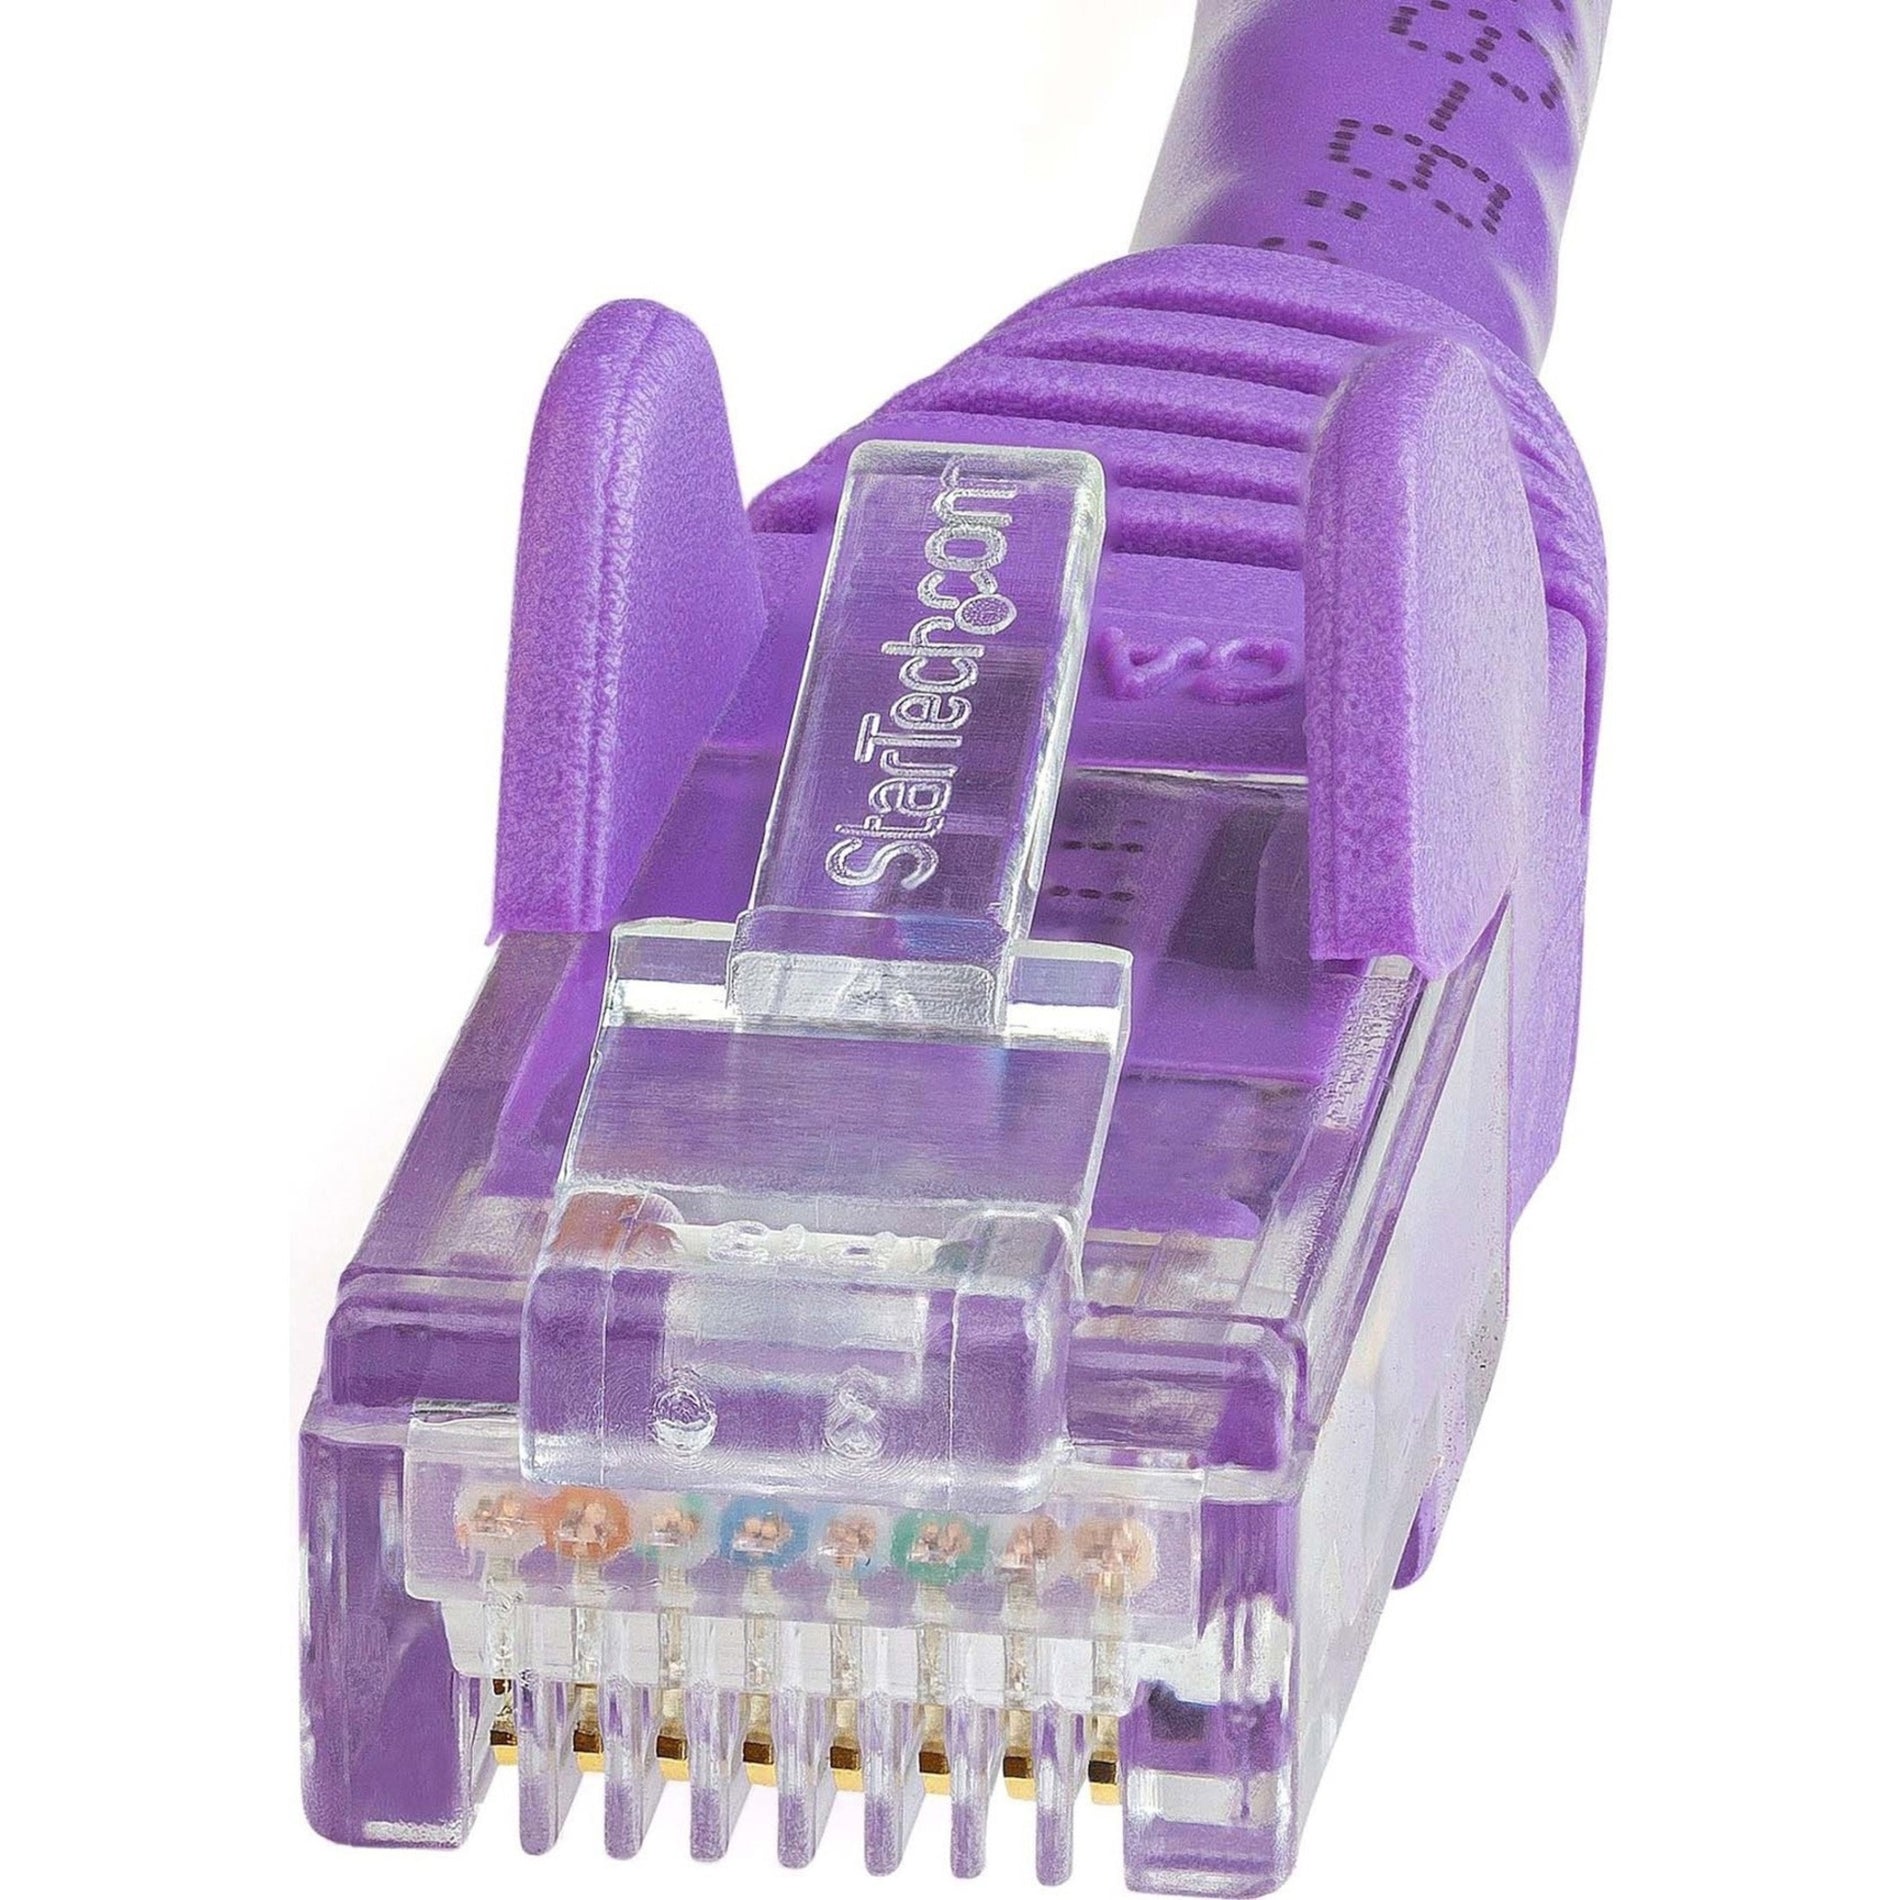 StarTech.com N6PATCH10PL 10 ft Purple Snagless Cat6 UTP Patch Cable, Molded, 10 Gbit/s Data Transfer Rate, Gold Plated Connectors